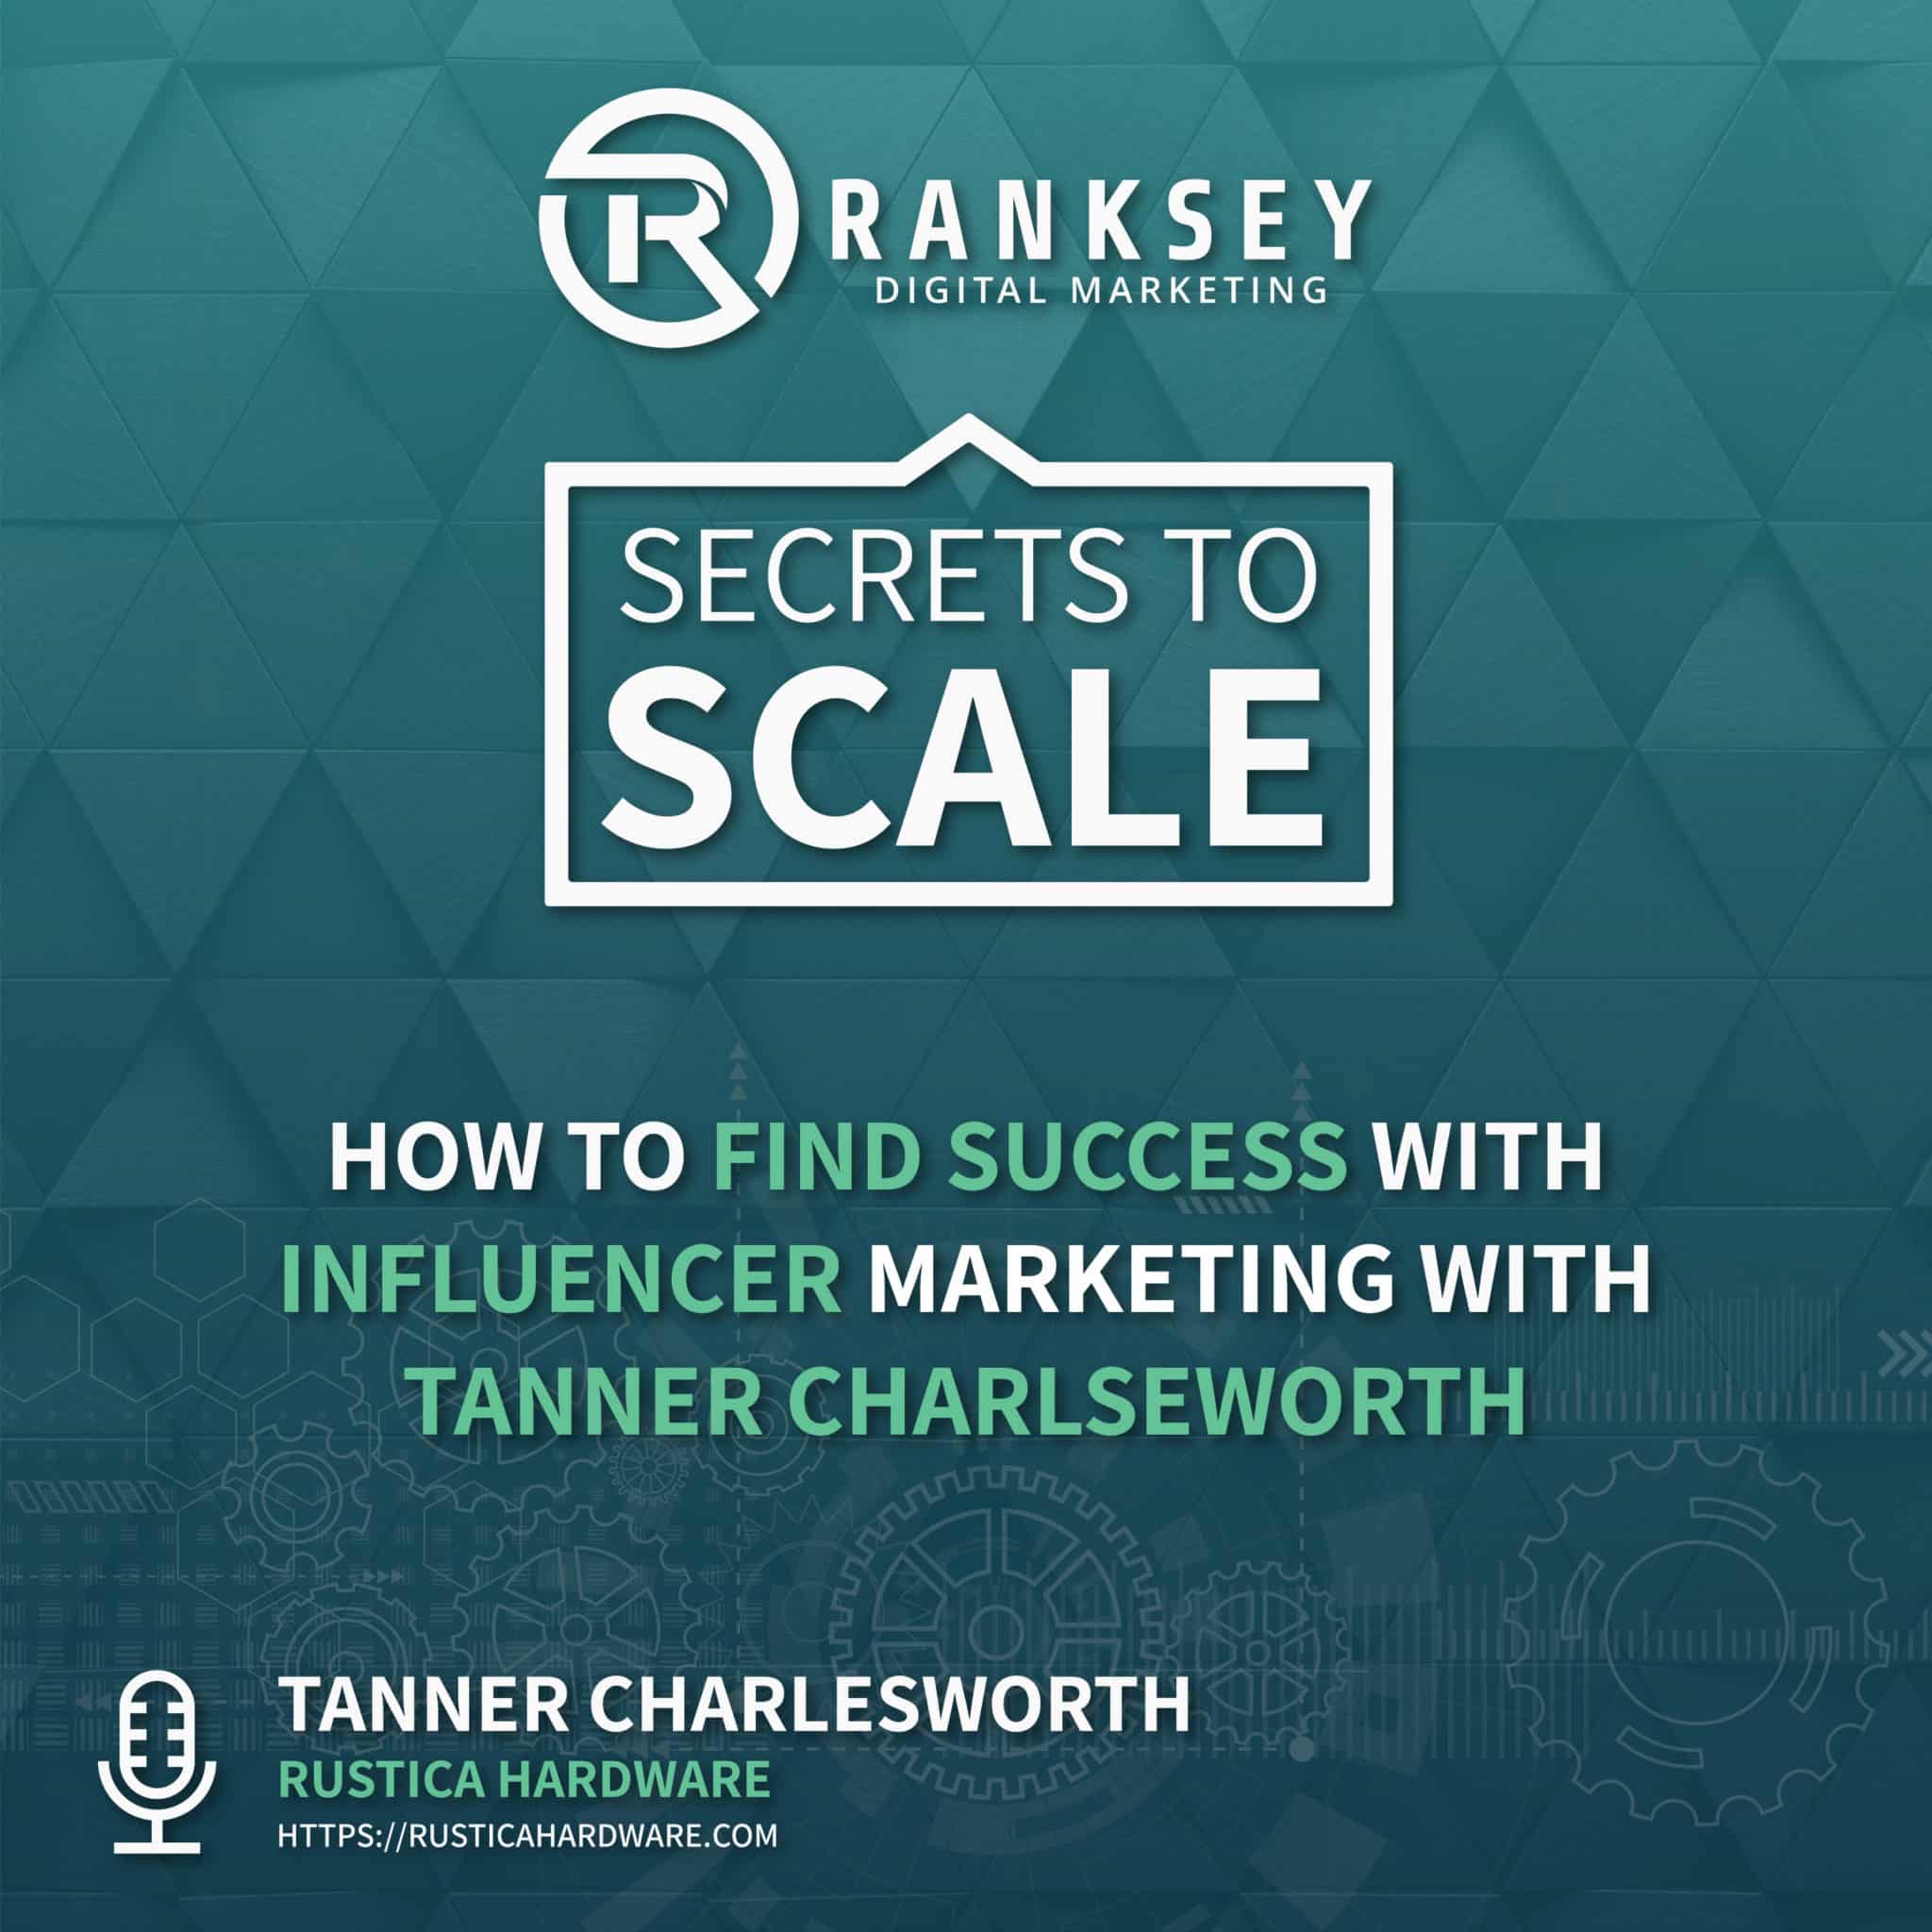 019 - How To Find Success With Influencer Marketing with Tanner Charlesworth